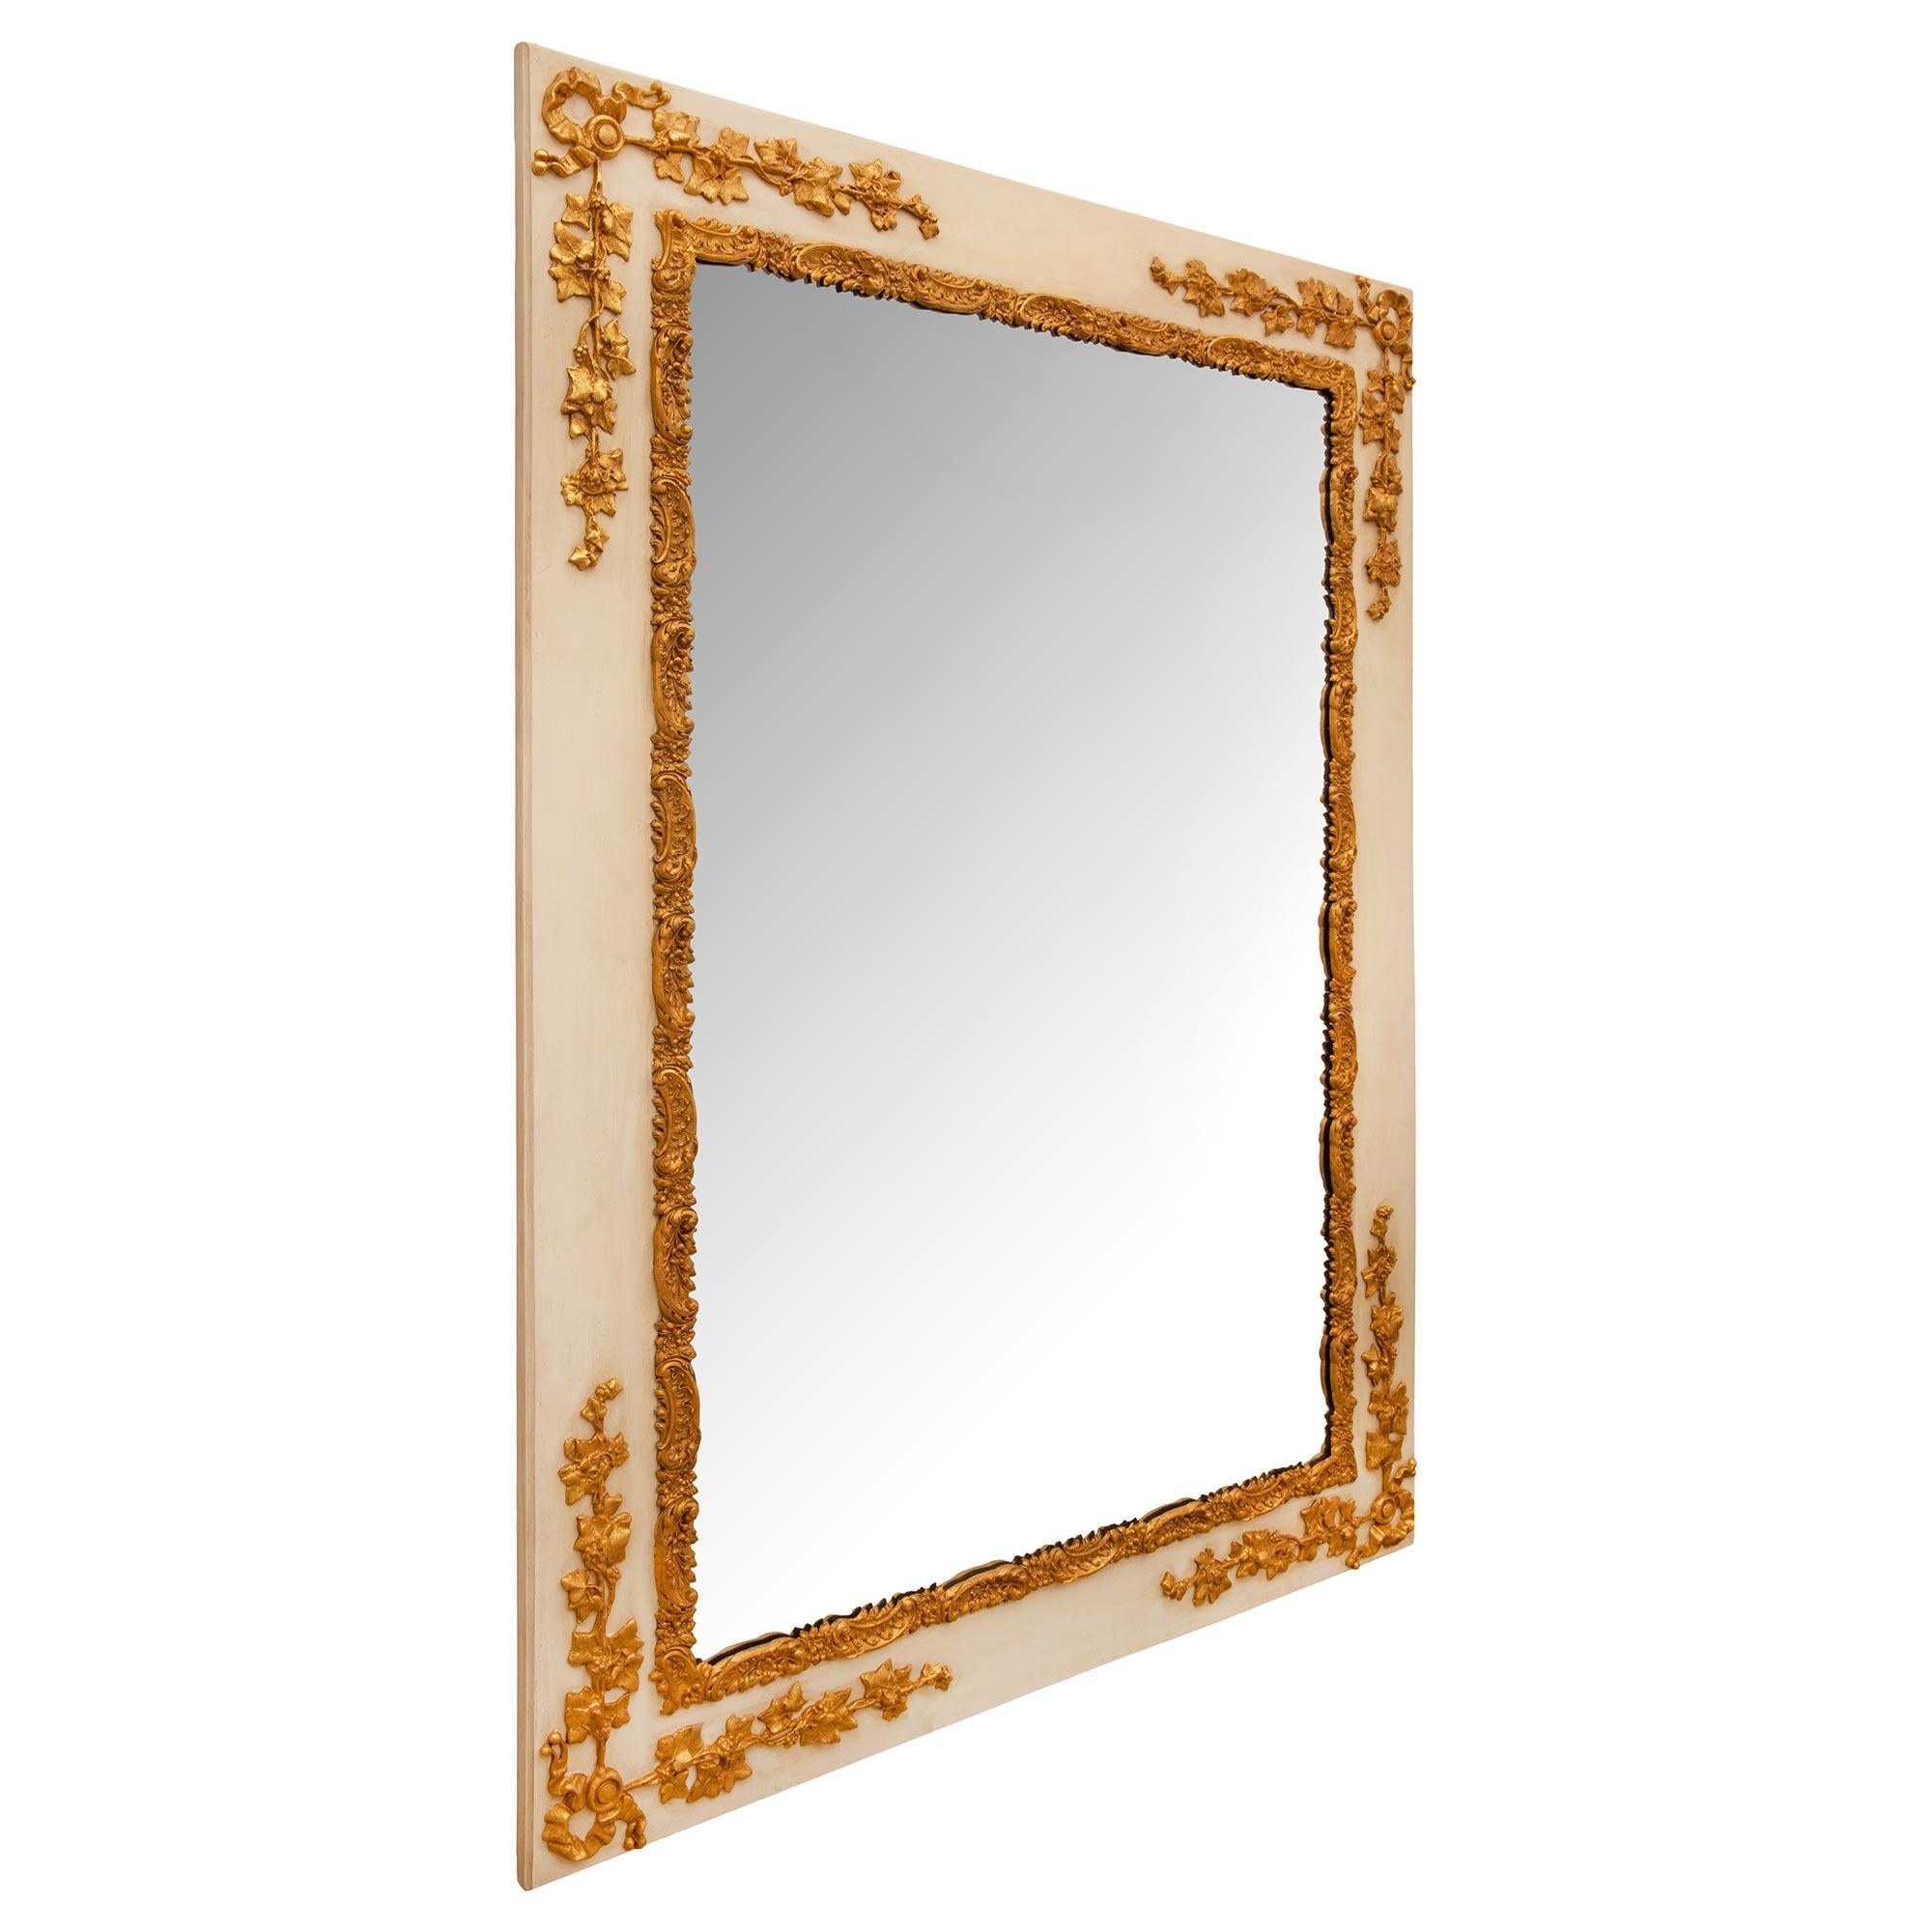 A striking and most unique French 19th century Louis XVI st. patinated and giltwood mirror. The mirror retains its original mirror plate framed within a beautiful richly carved giltwood frame with charming intricately detailed blooming flowers set